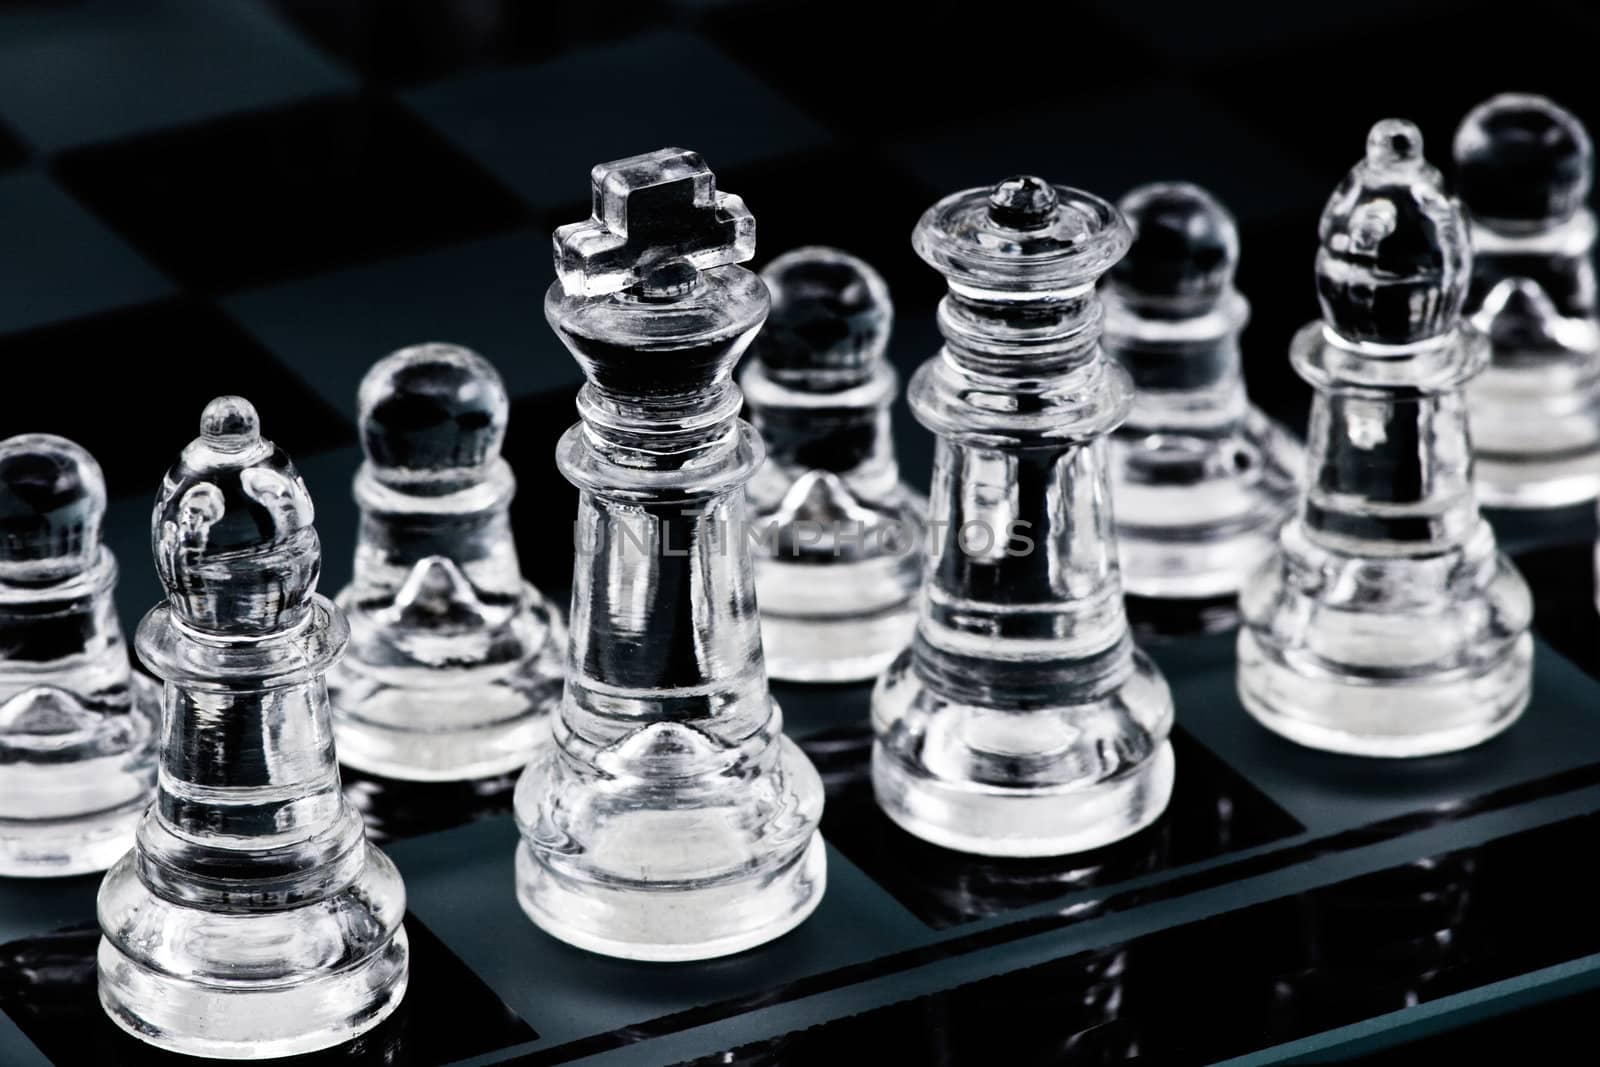 Glass chess pieces in start position on glass board